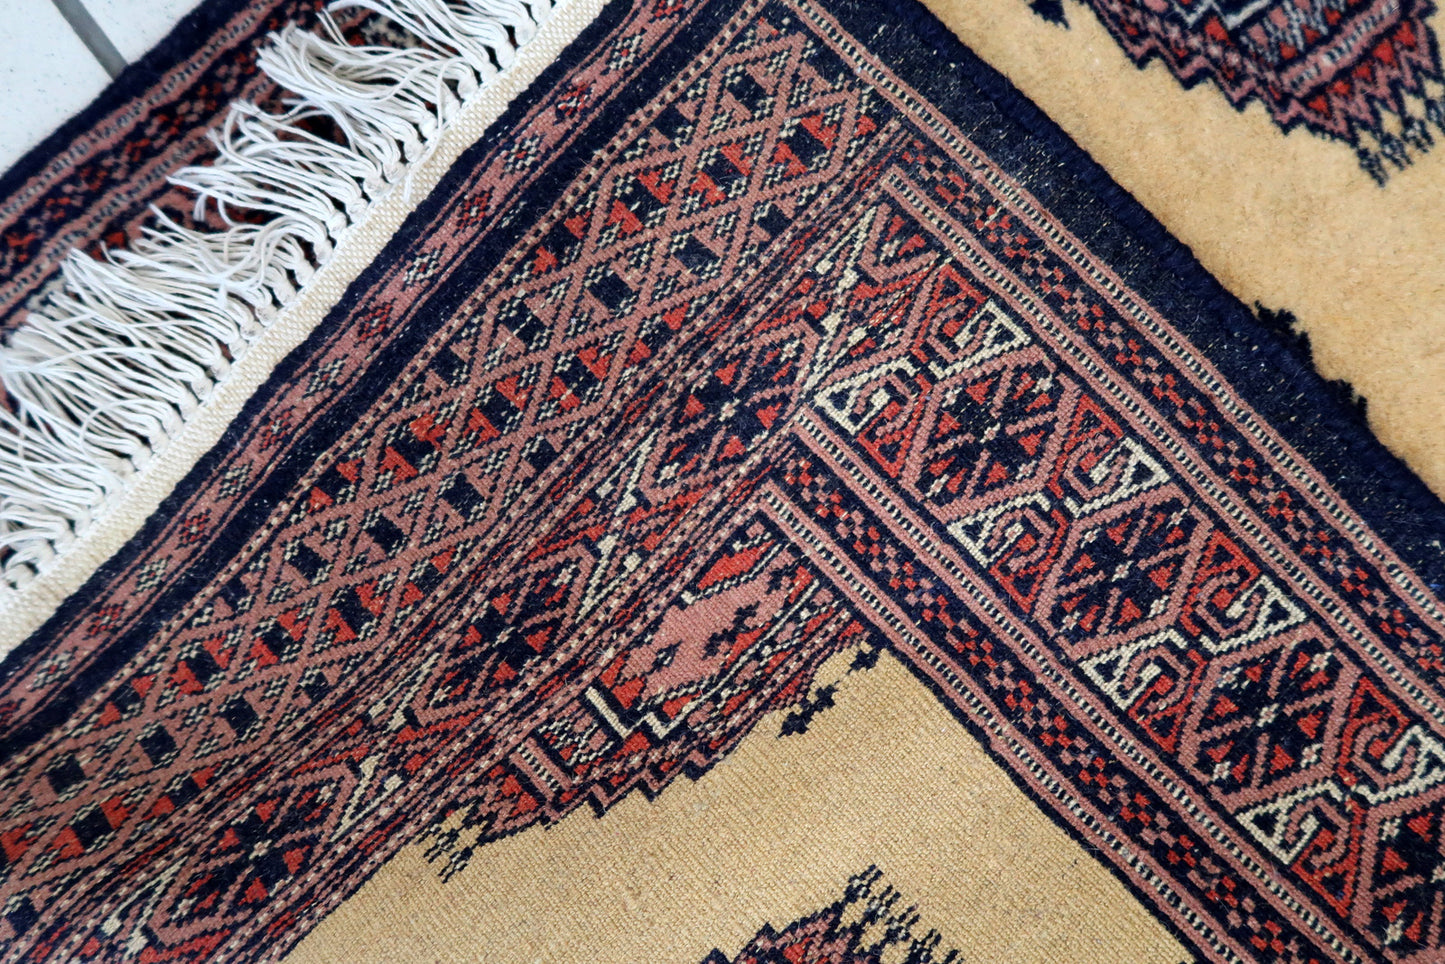 Handmade vintage Uzbek Bukhara narrow runner in yellow wool. The rug has traditional design. It is from the end of 20th century, in original good condition.